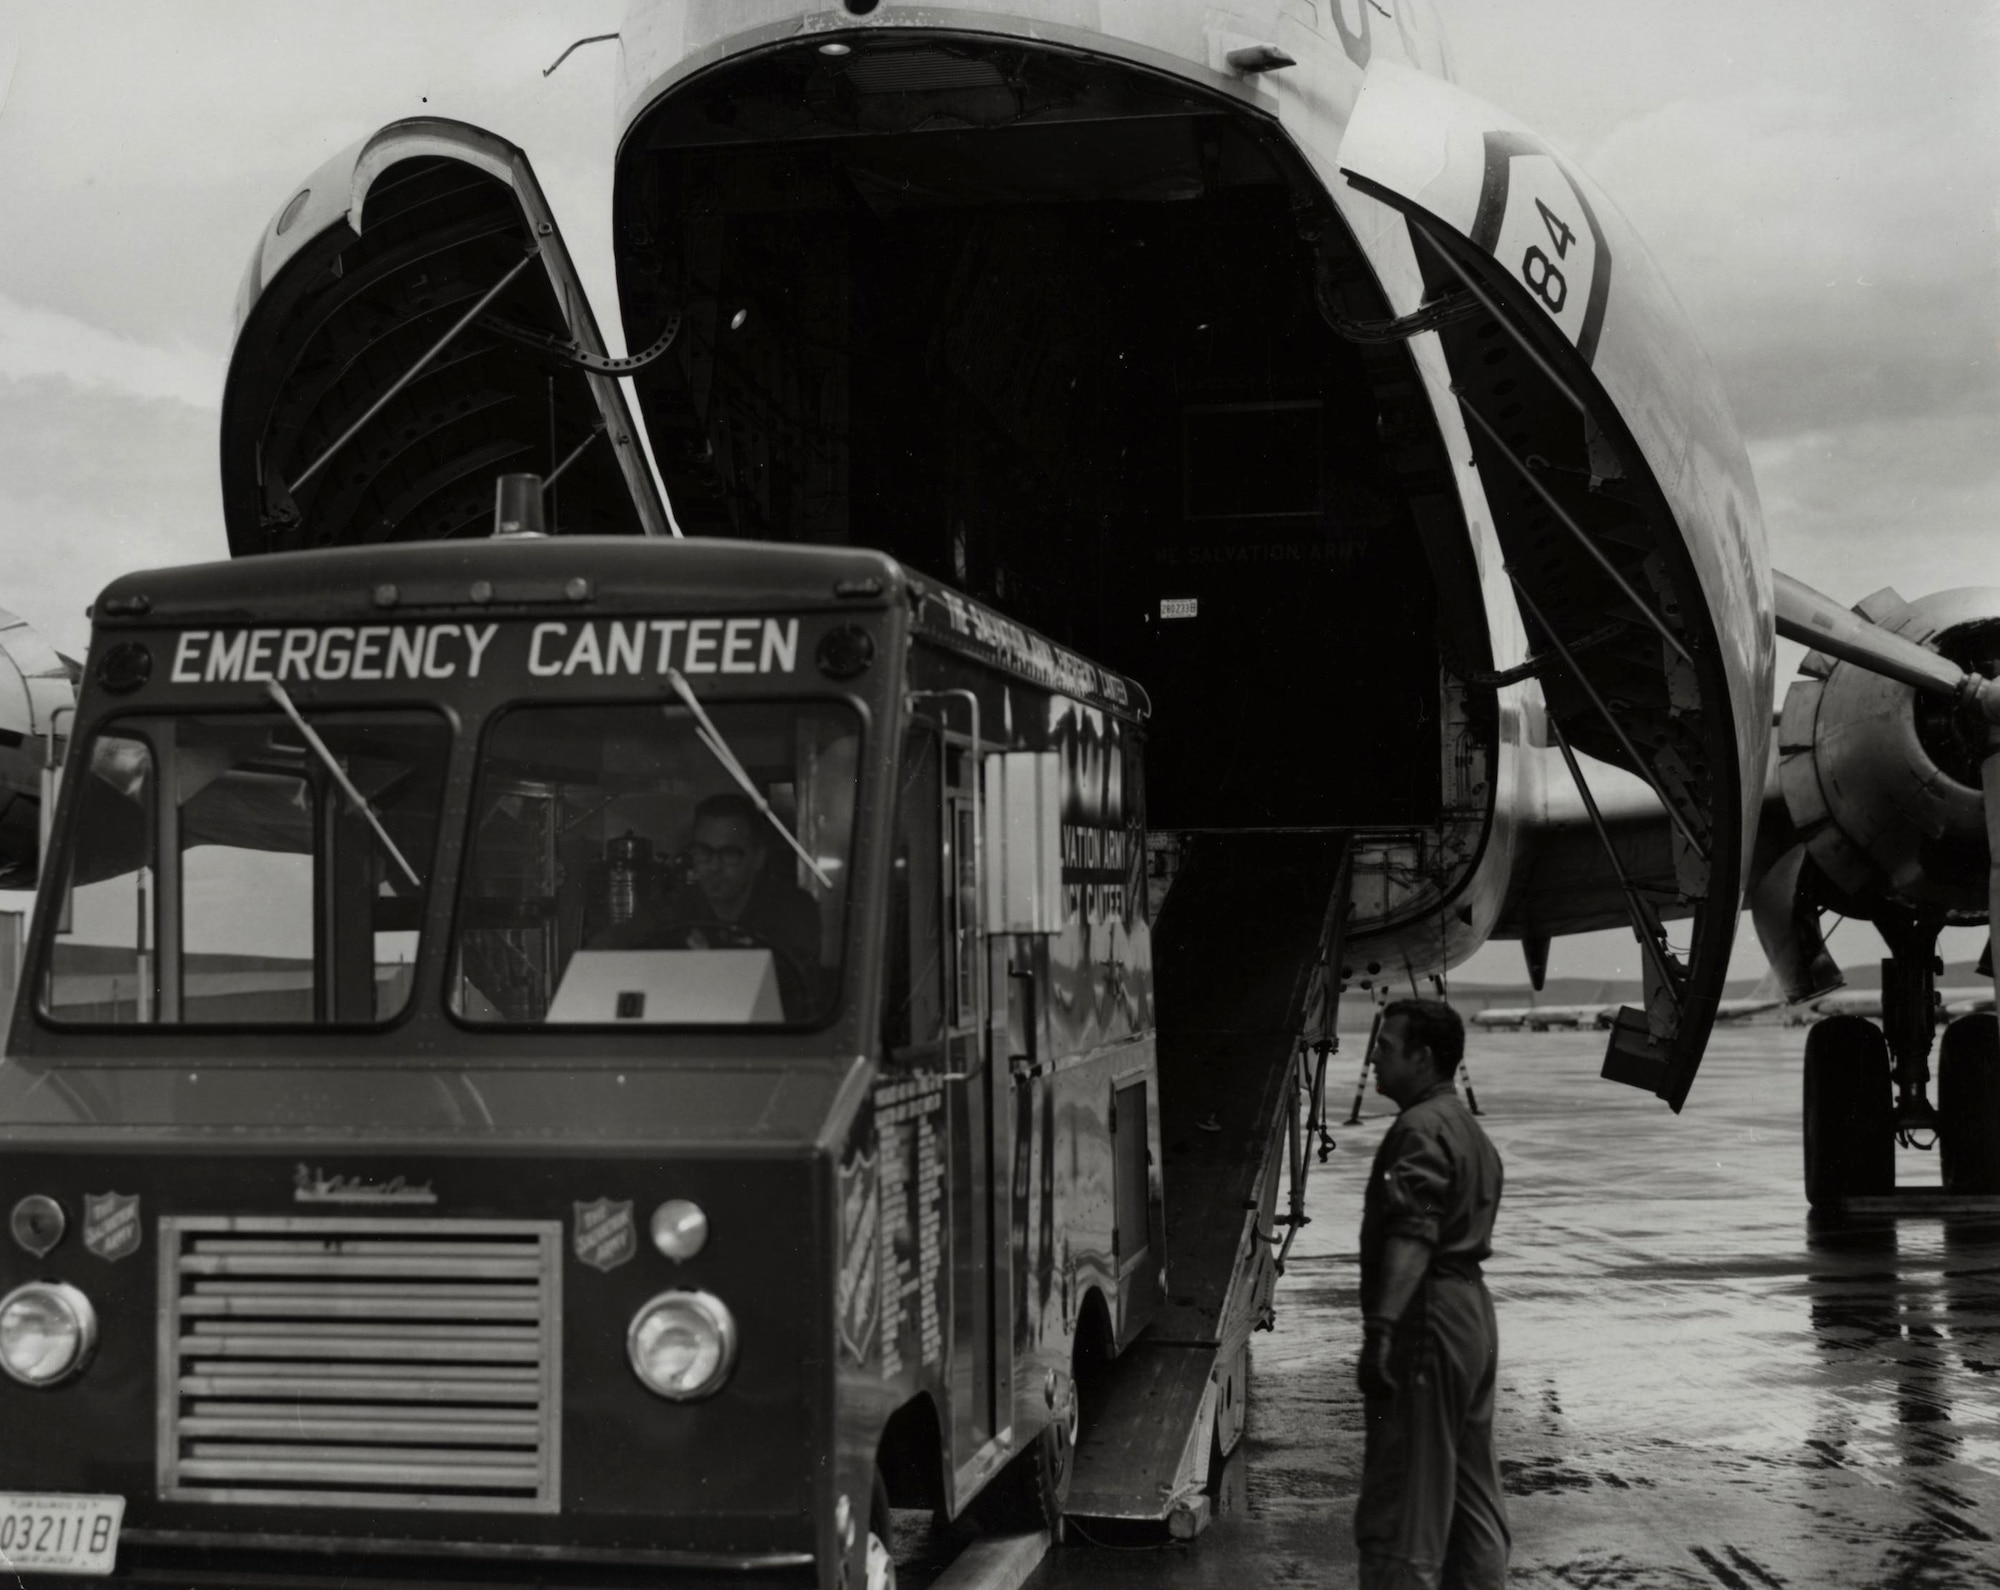 A U.S. Air Force loadmaster oversees the unloading of a Salvation Army canteen response vehicle from a Douglas C-124 Globemaster II at Ellsworth Air Force Base, S.D., following the flood of June 1972. Ellsworth provided equipment, personnel and support nonstop to aid local authorities during rescue and recovery operations.  (U.S. Air Force courtesy photo)